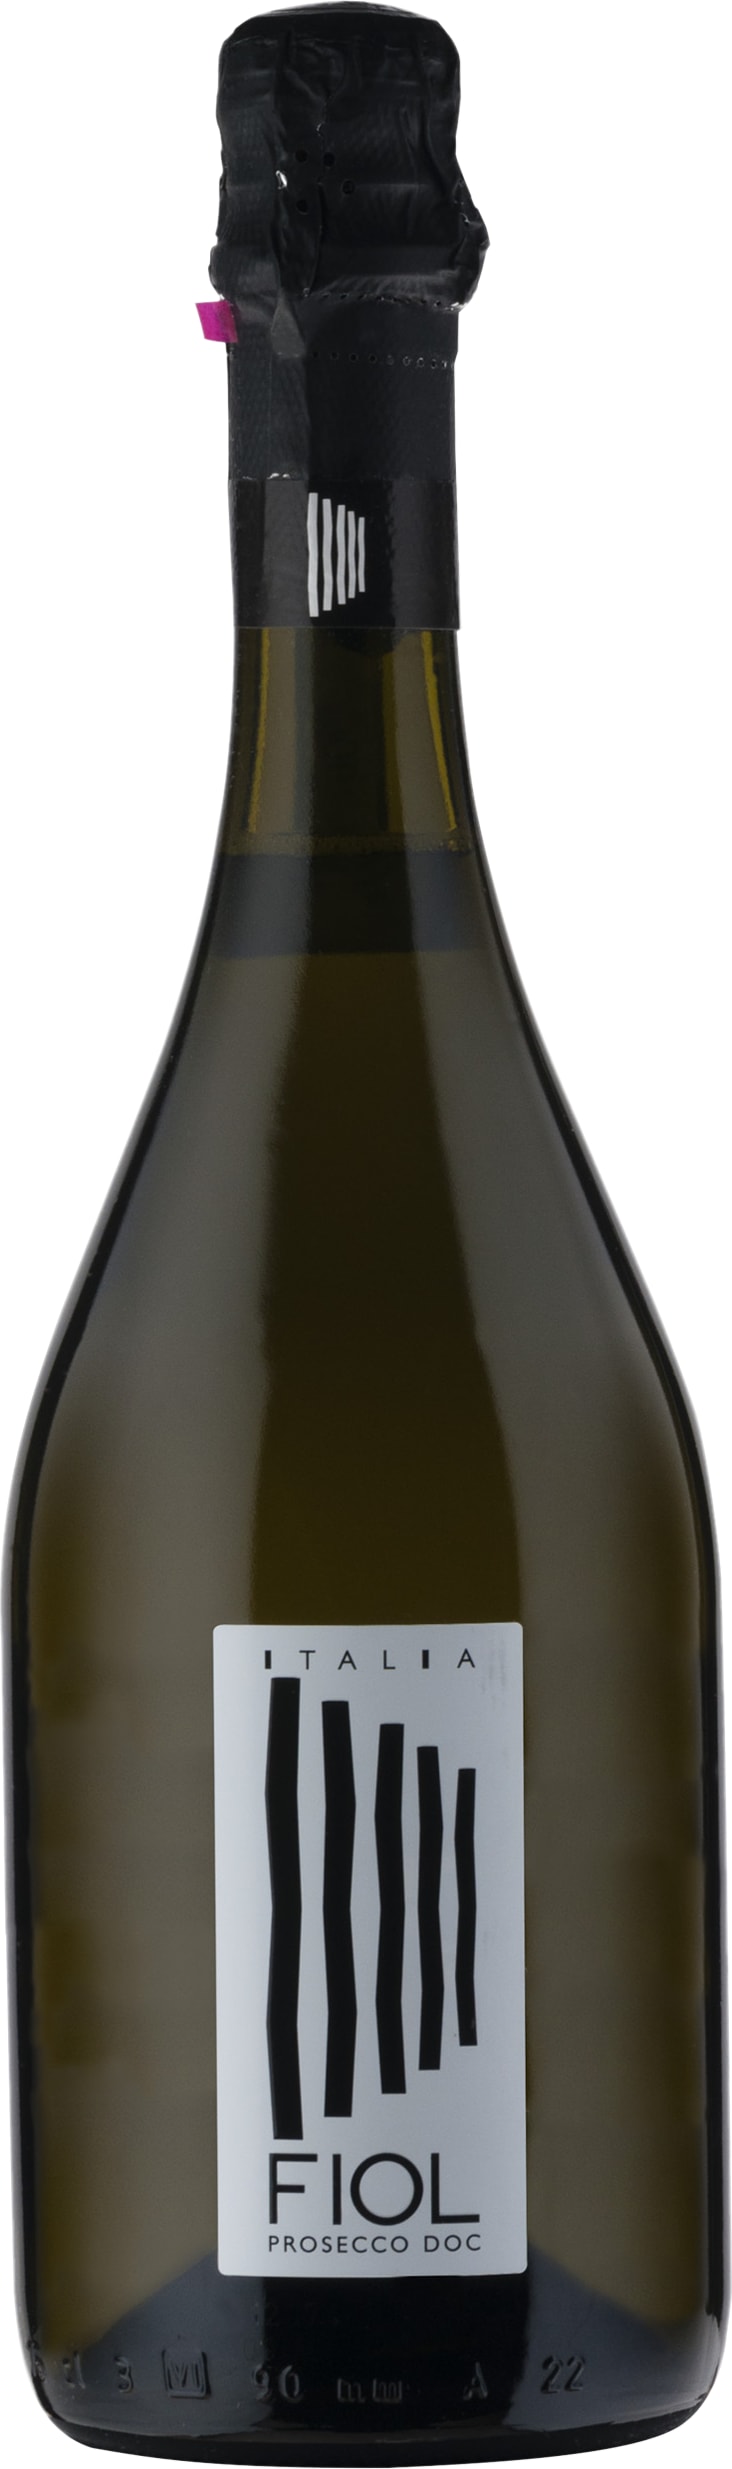 Fiol Prosecco Extra Dry, Magnum 150cl NV - Buy Fiol Wines from GREAT WINES DIRECT wine shop